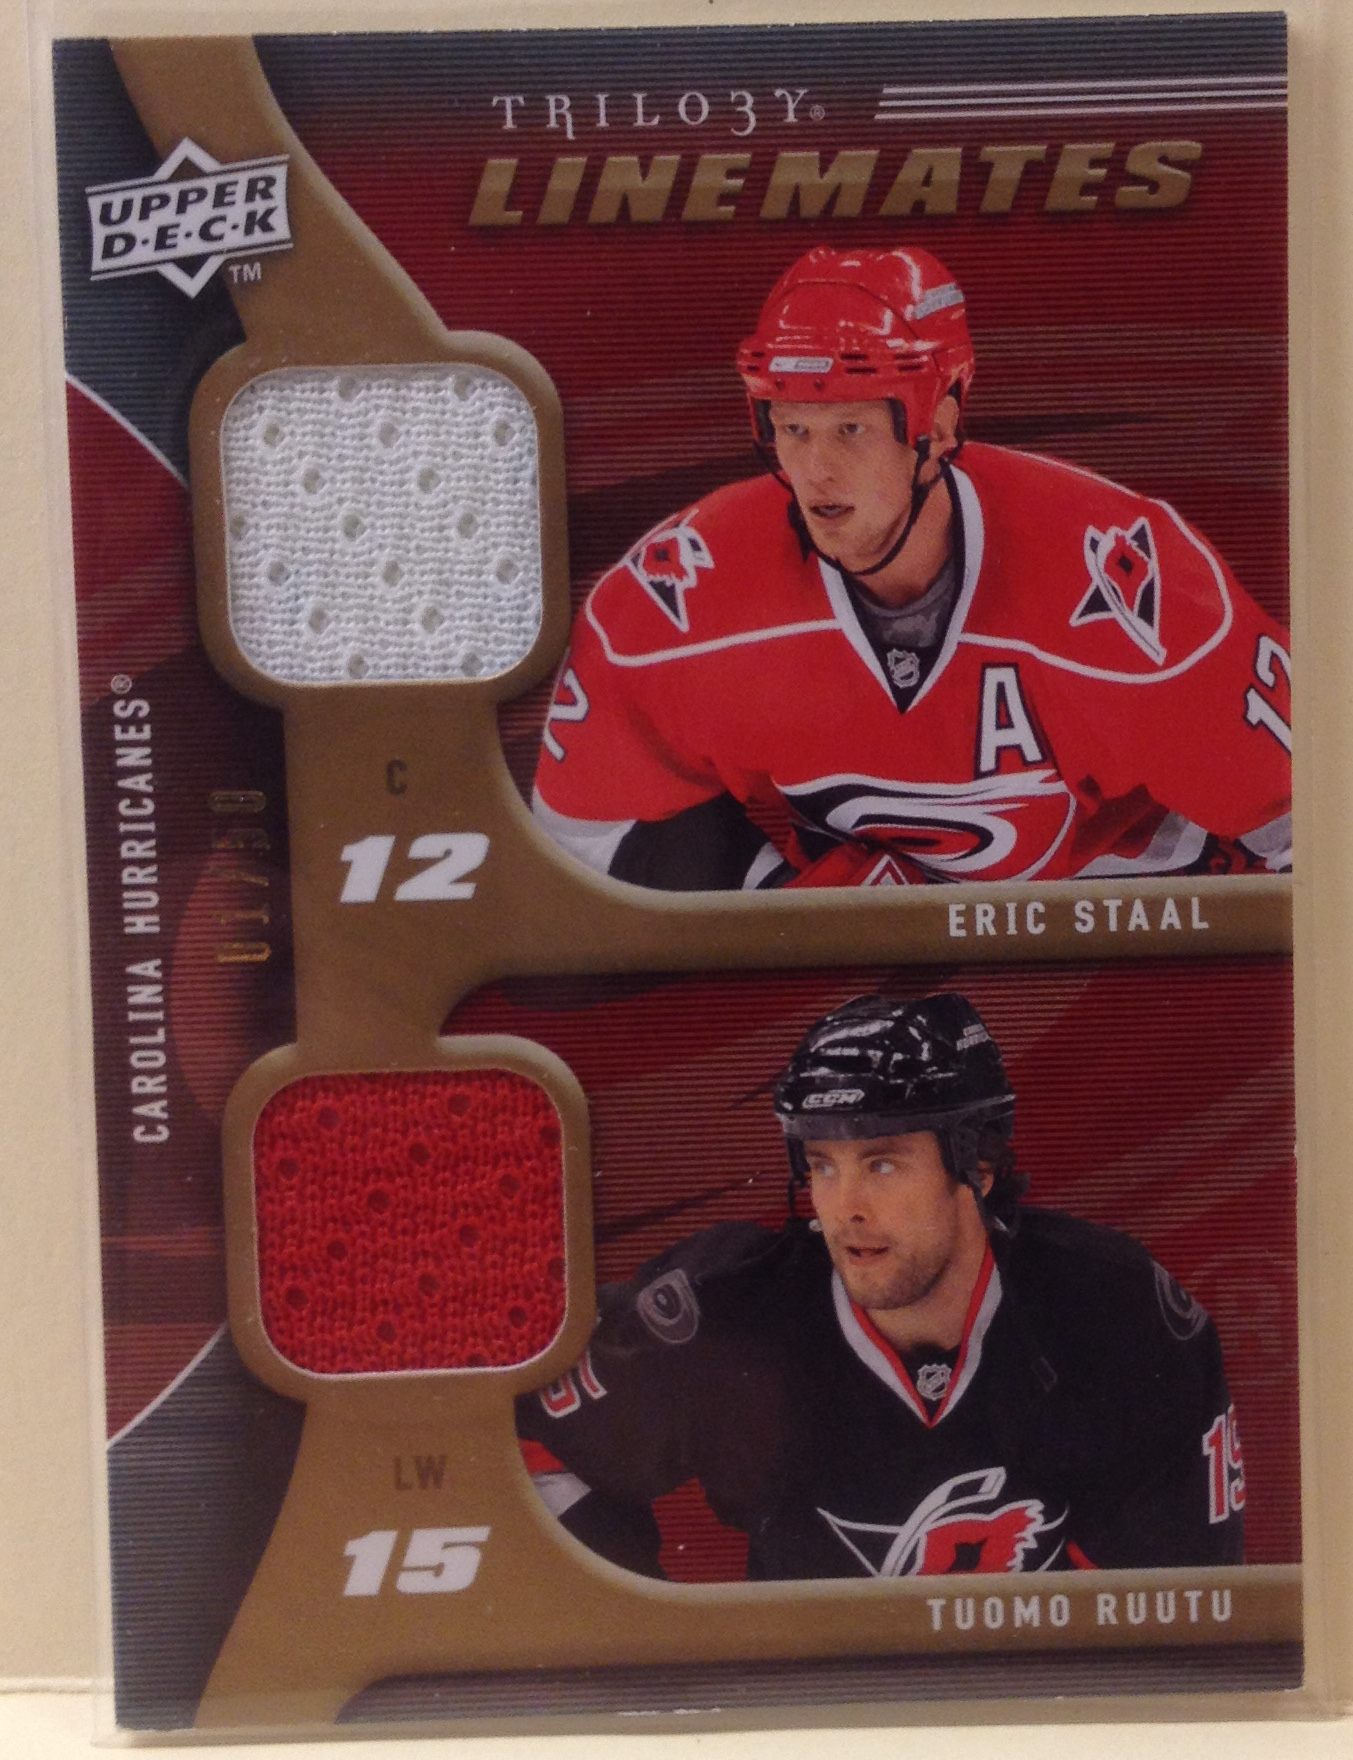 2009-10 Upper Deck Trilogy Line Mates Gold #LMRS Tuomo Ruutu/Eric Staal